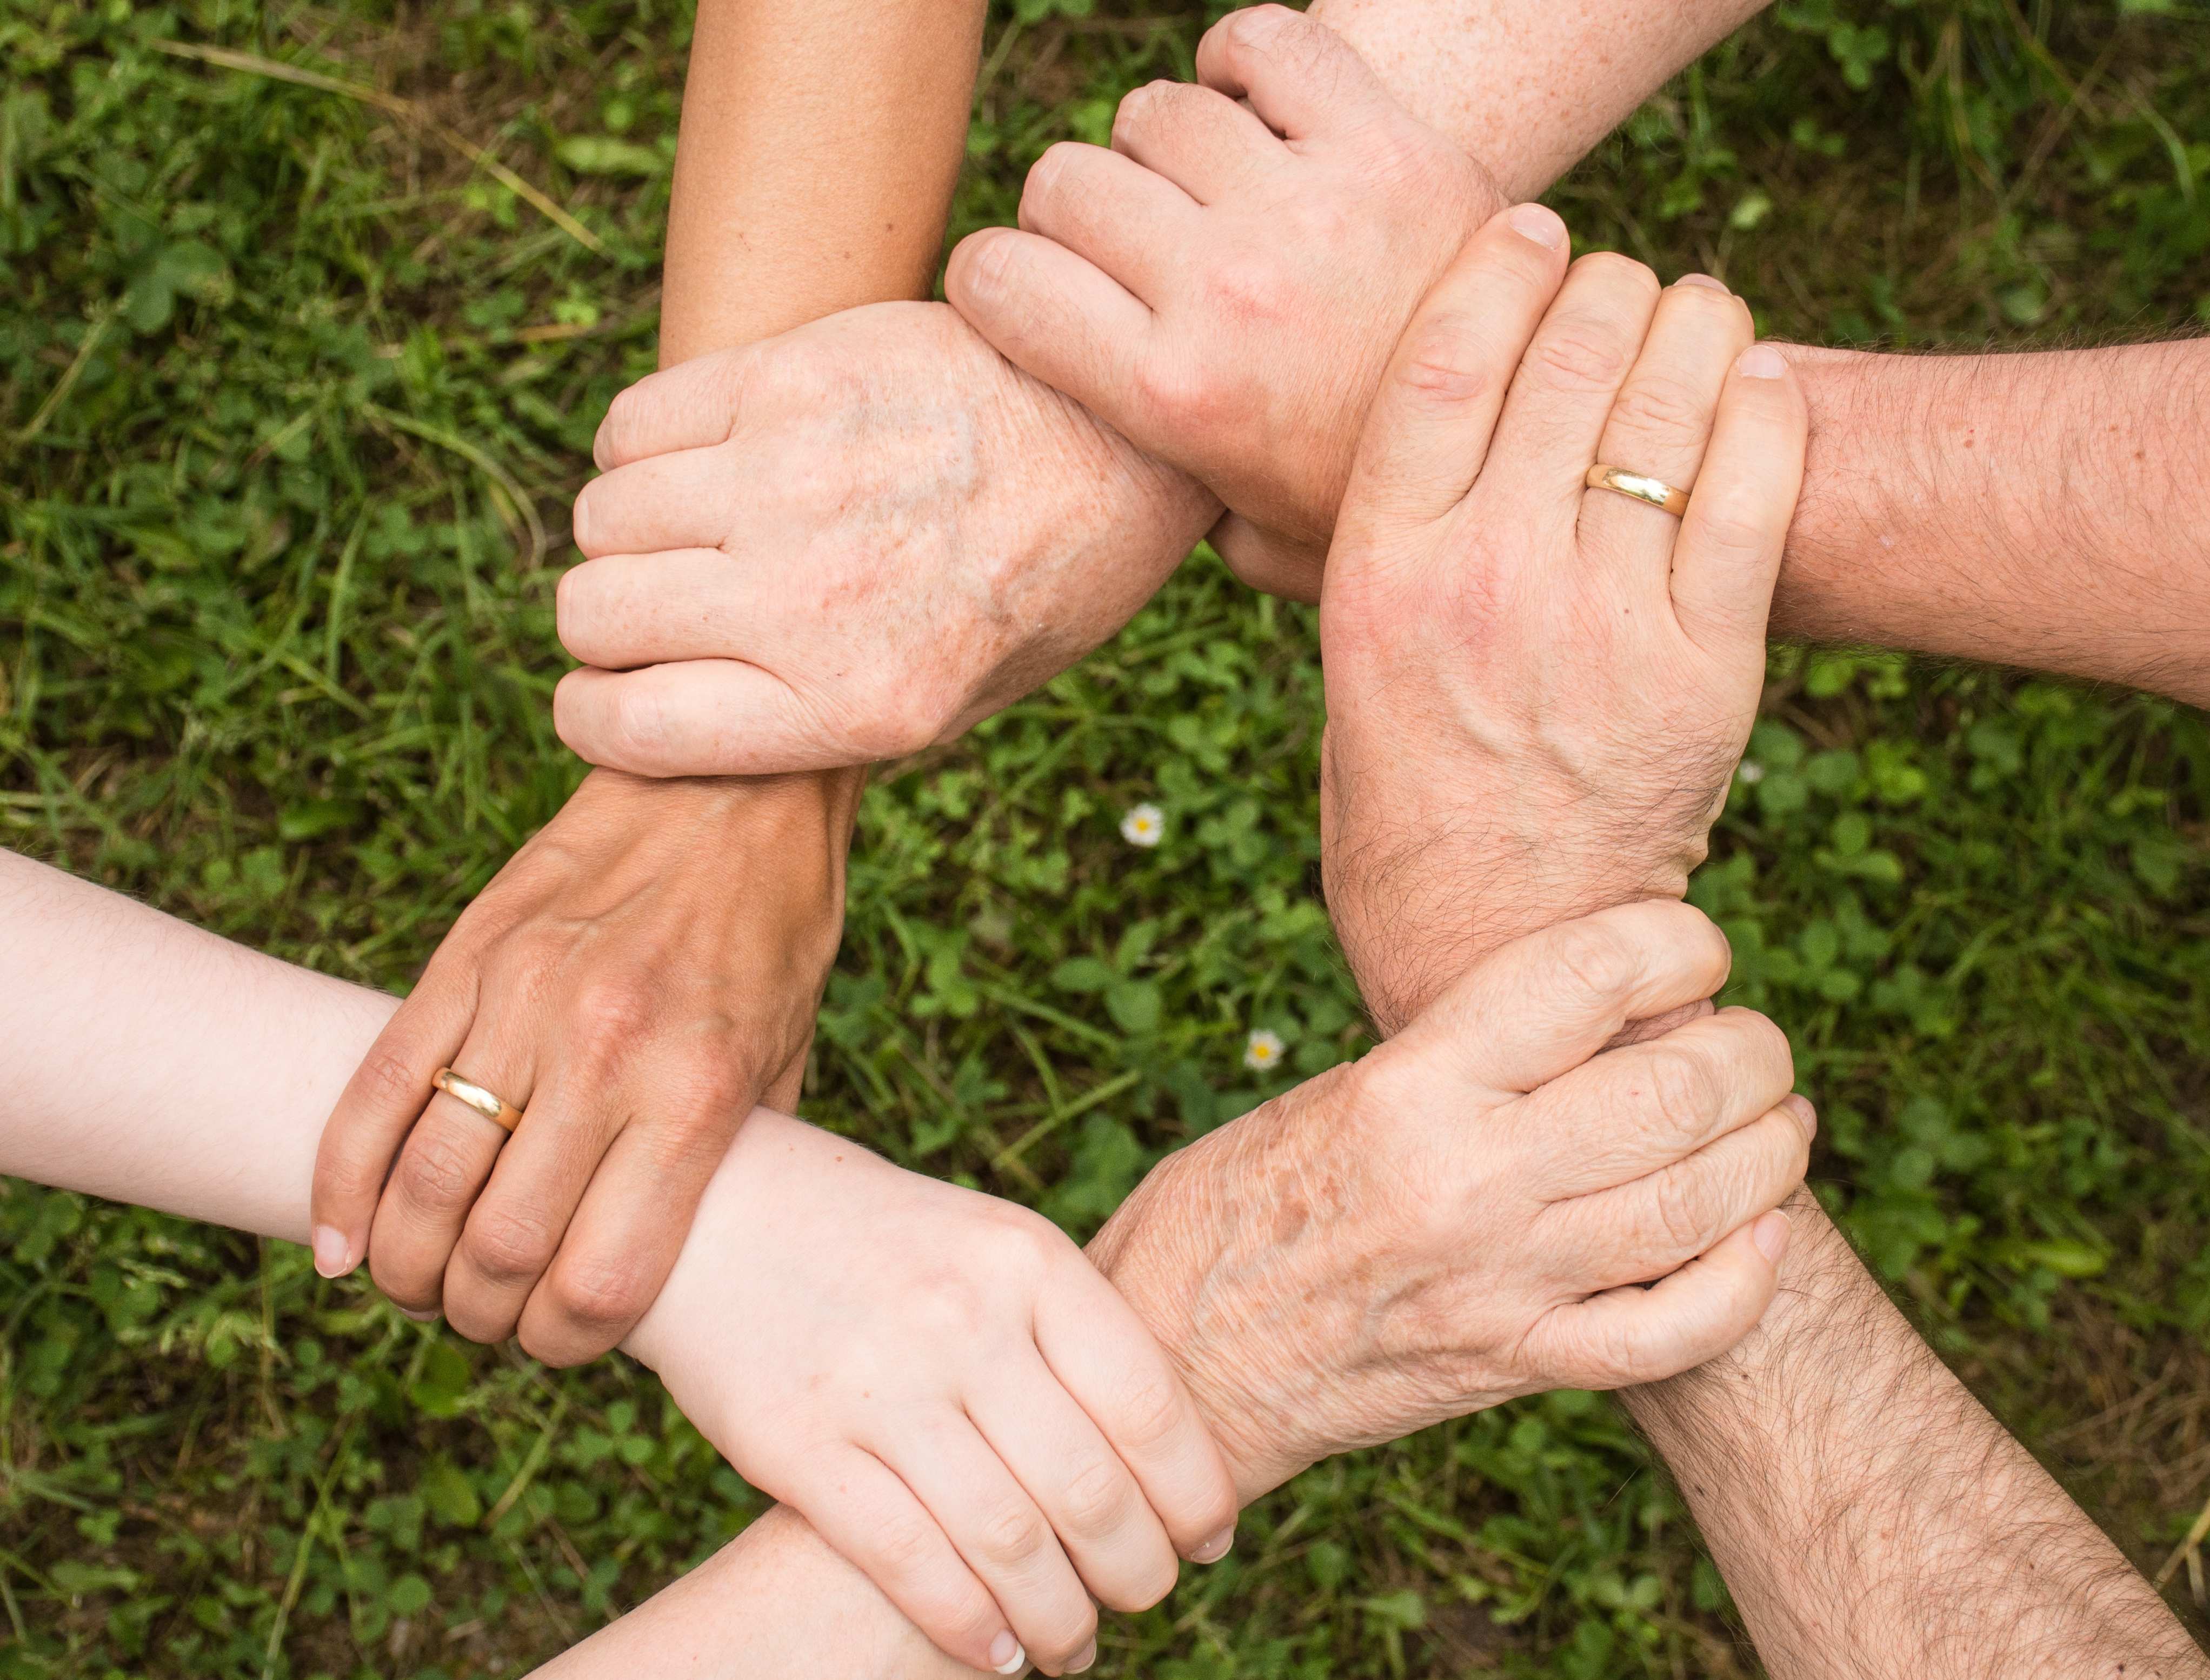 Photo by Pixabay Group of People Holding Arms1